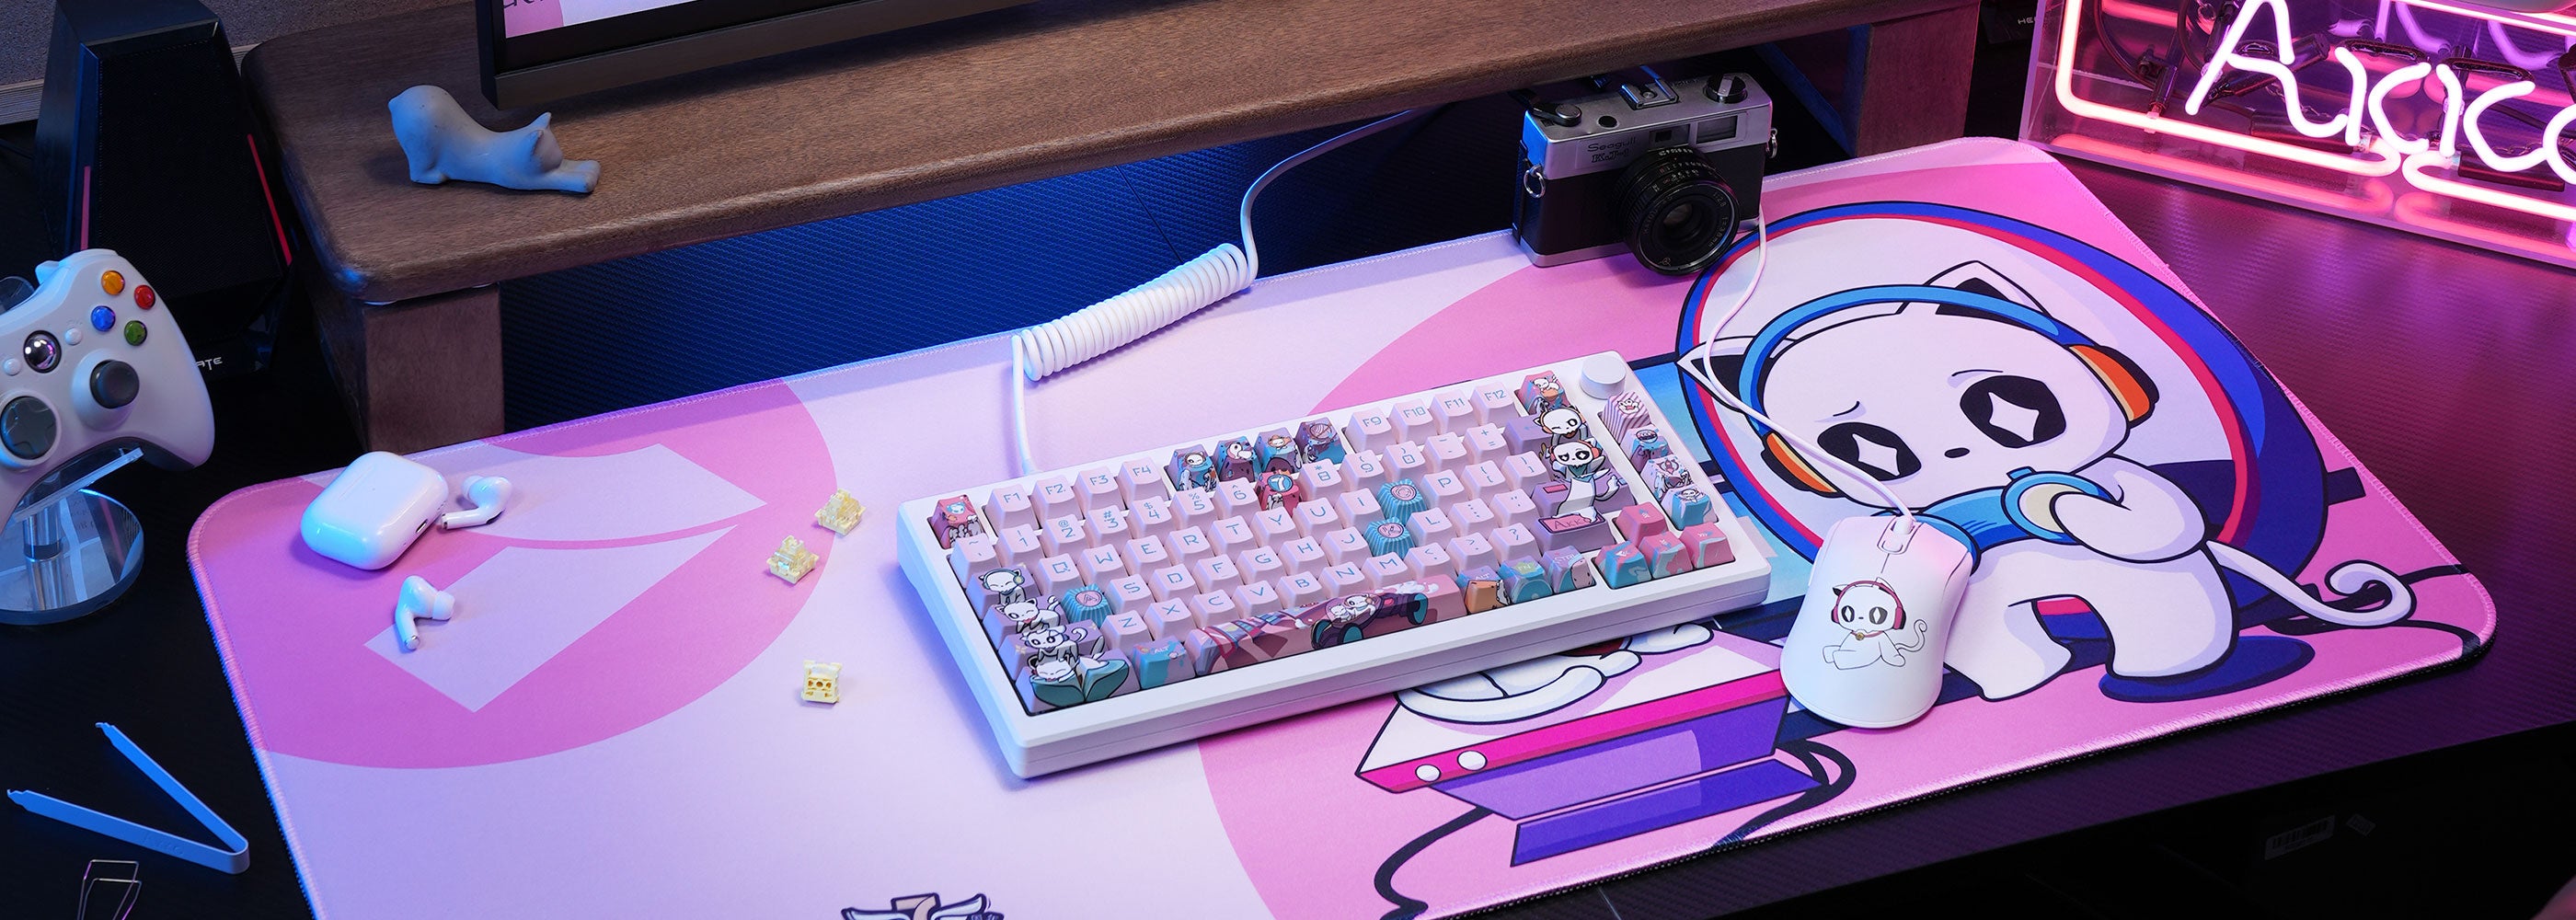 Load video: Akko 7th Anniversary MOD 007 PC Magnetic Switches Keyboard